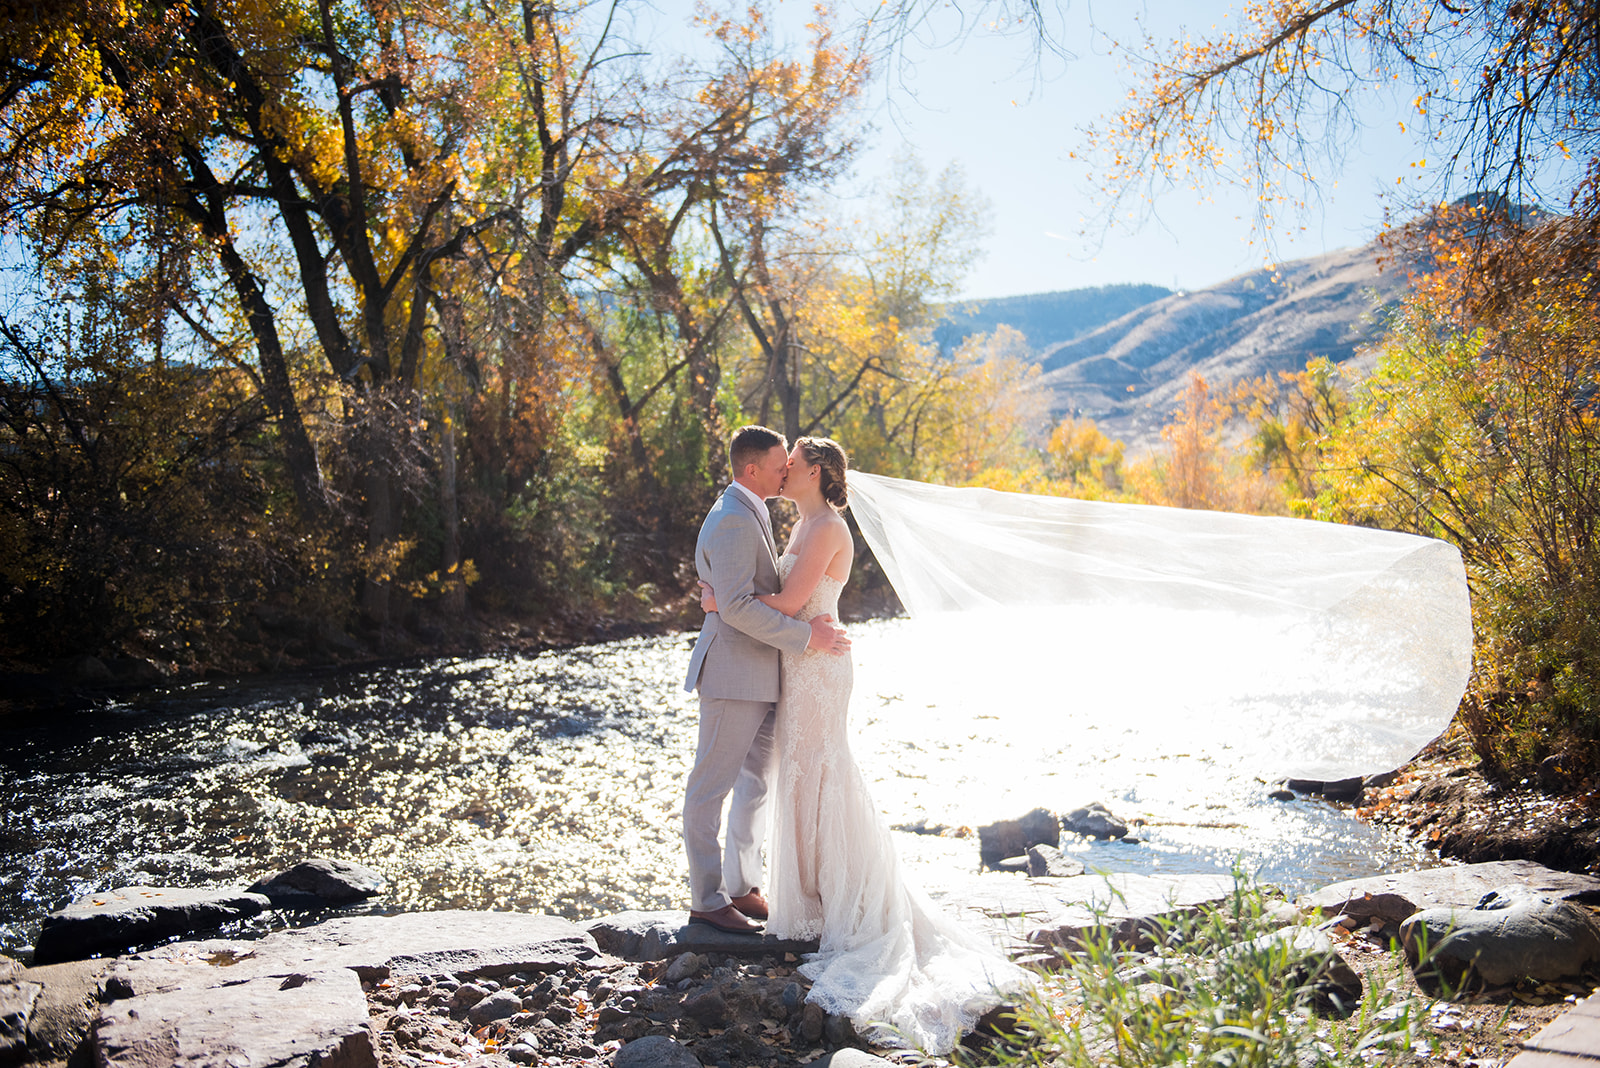 The bride and groom stand kissing on the edge of a beautiful creek with fall leaves in the background.